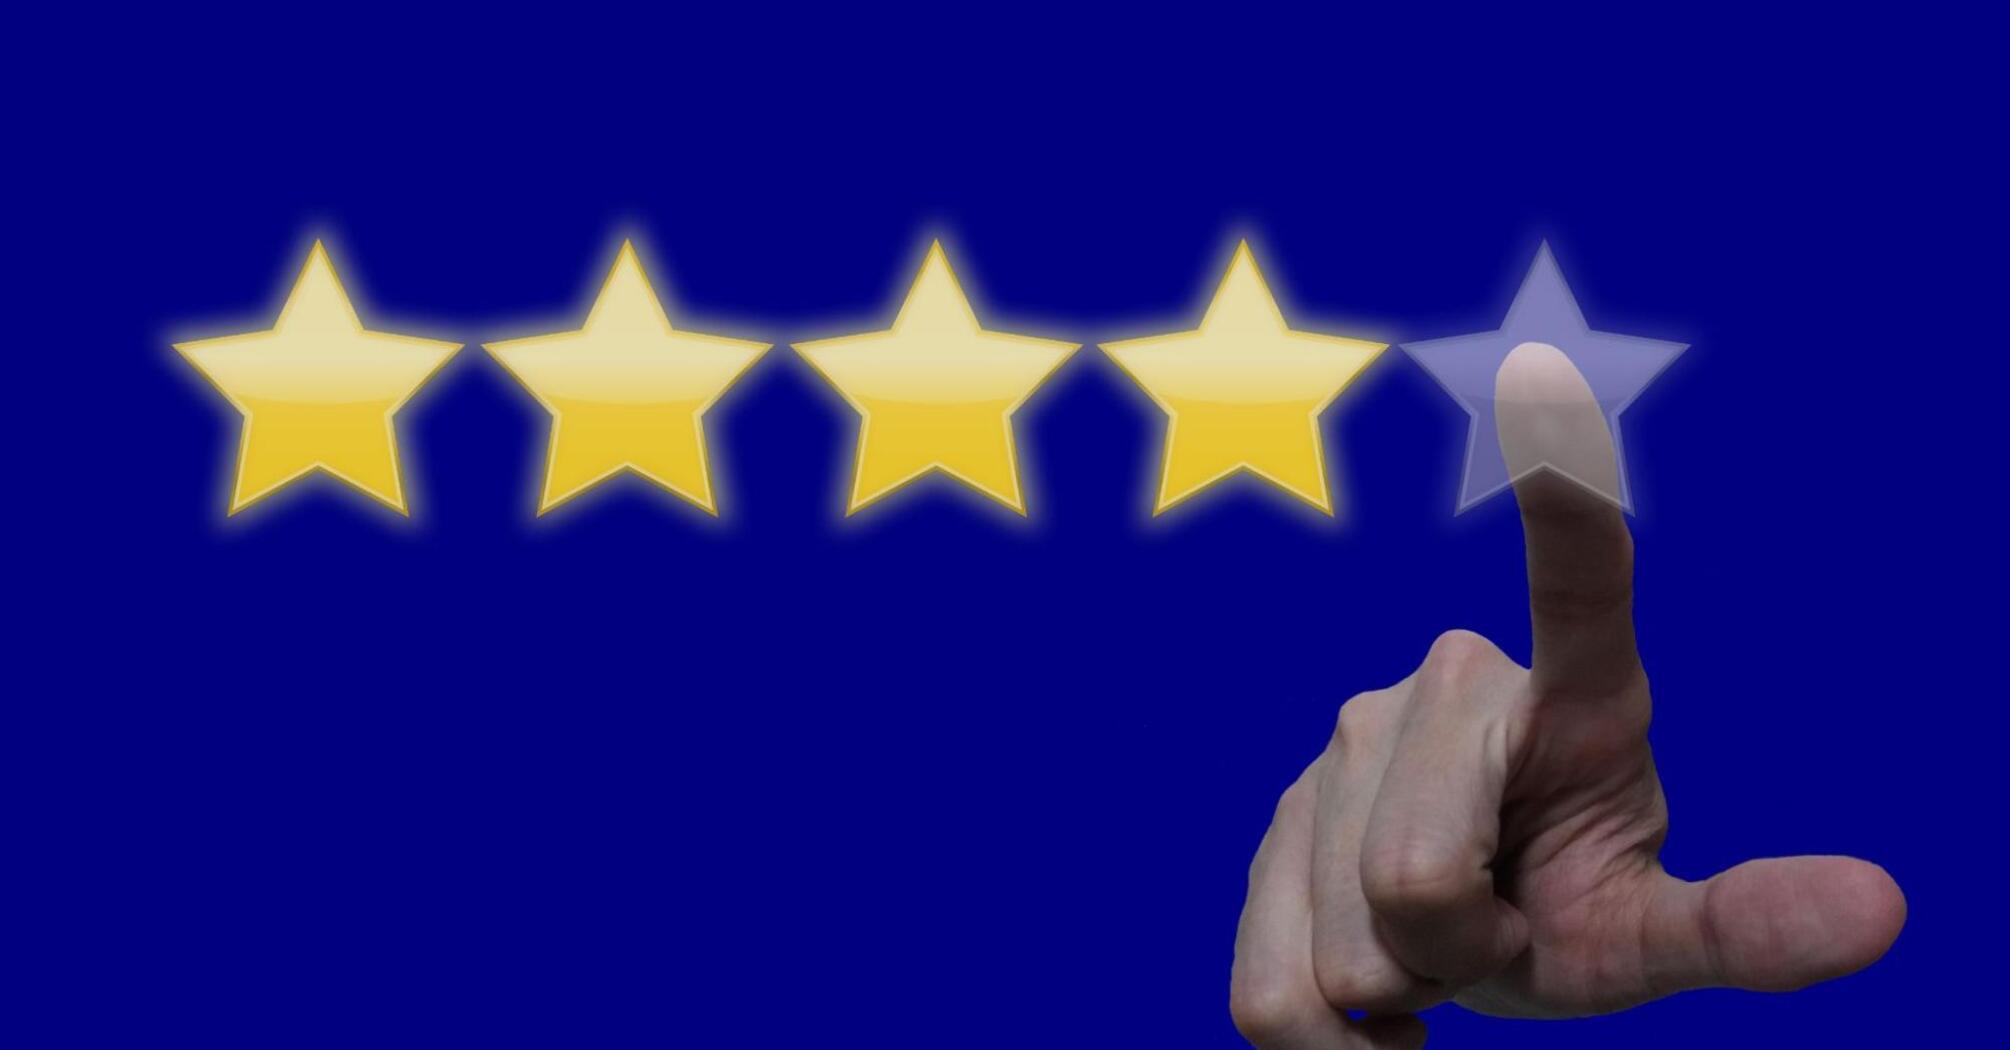 Image of five stars on a blue background